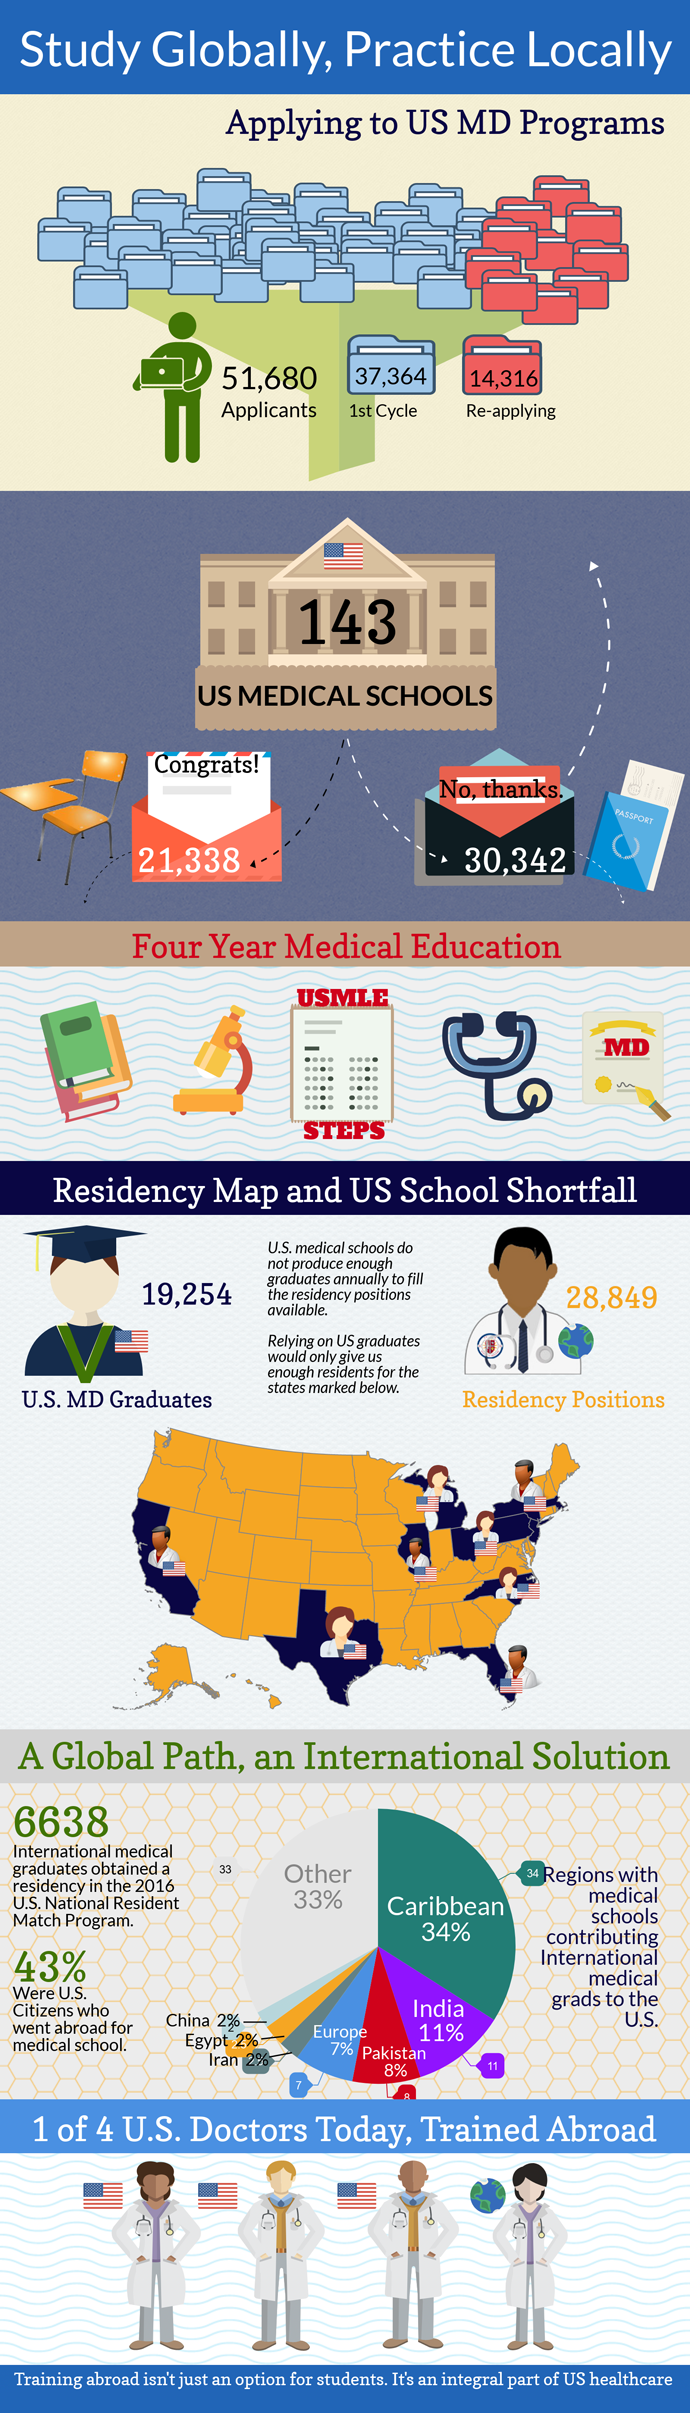 Study Globally Practice Locally Infographic